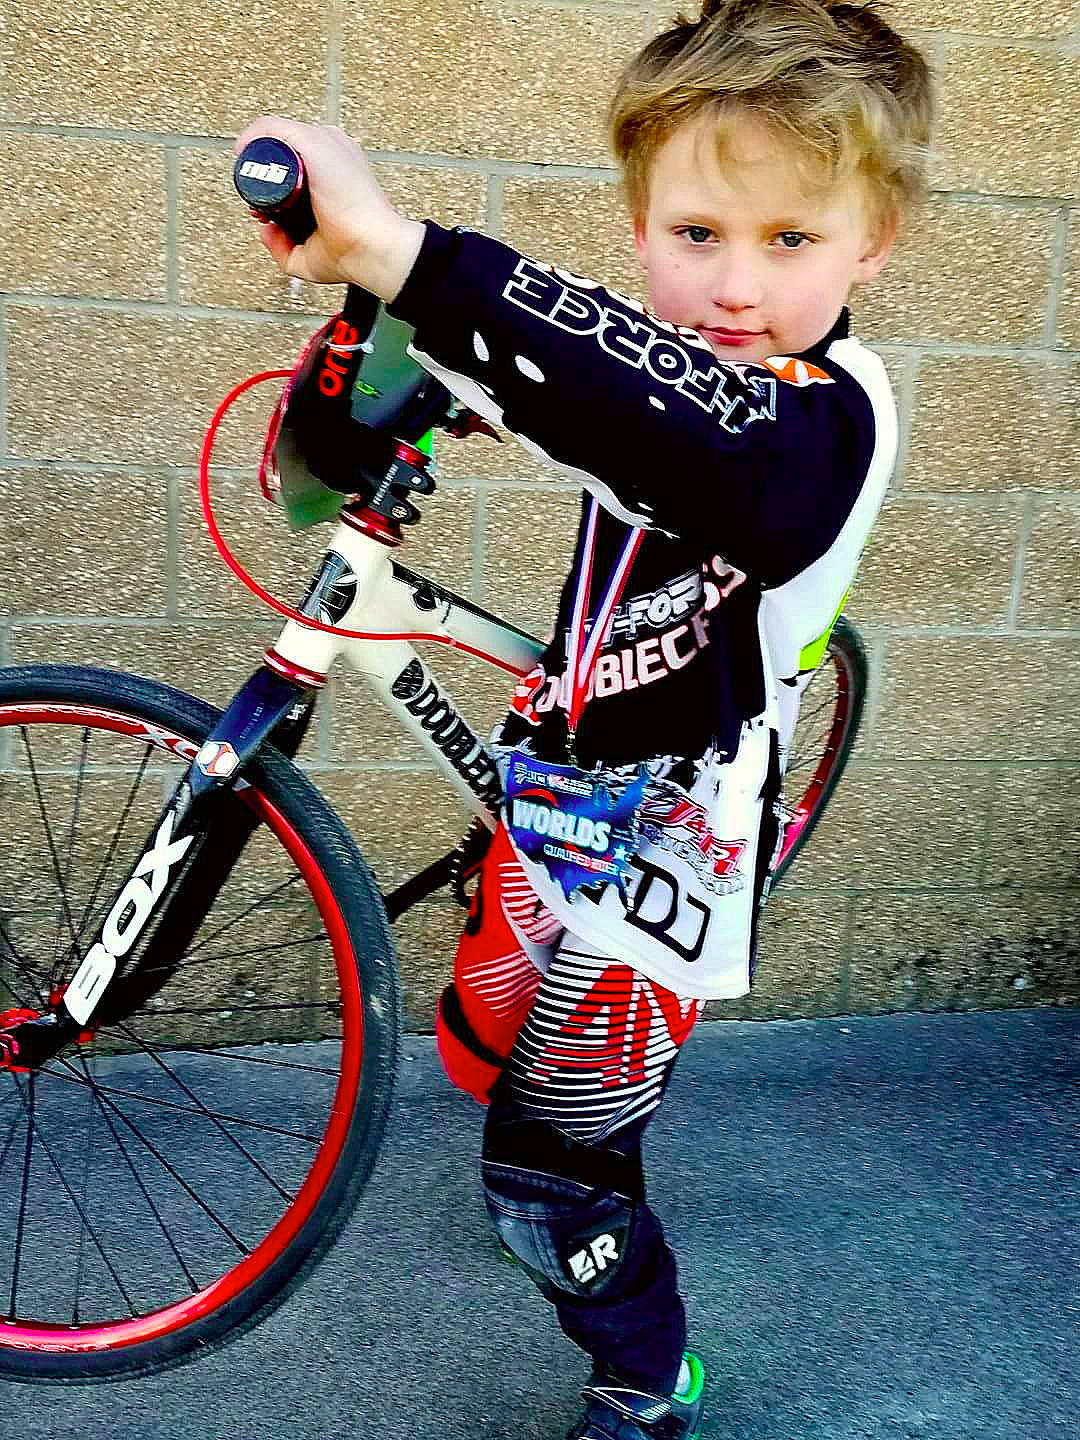 Damien Comeau, seven-year-old BMX rider, has qualified to represent the USA at the UCI BMX World Championships. (Courtesy Photo)